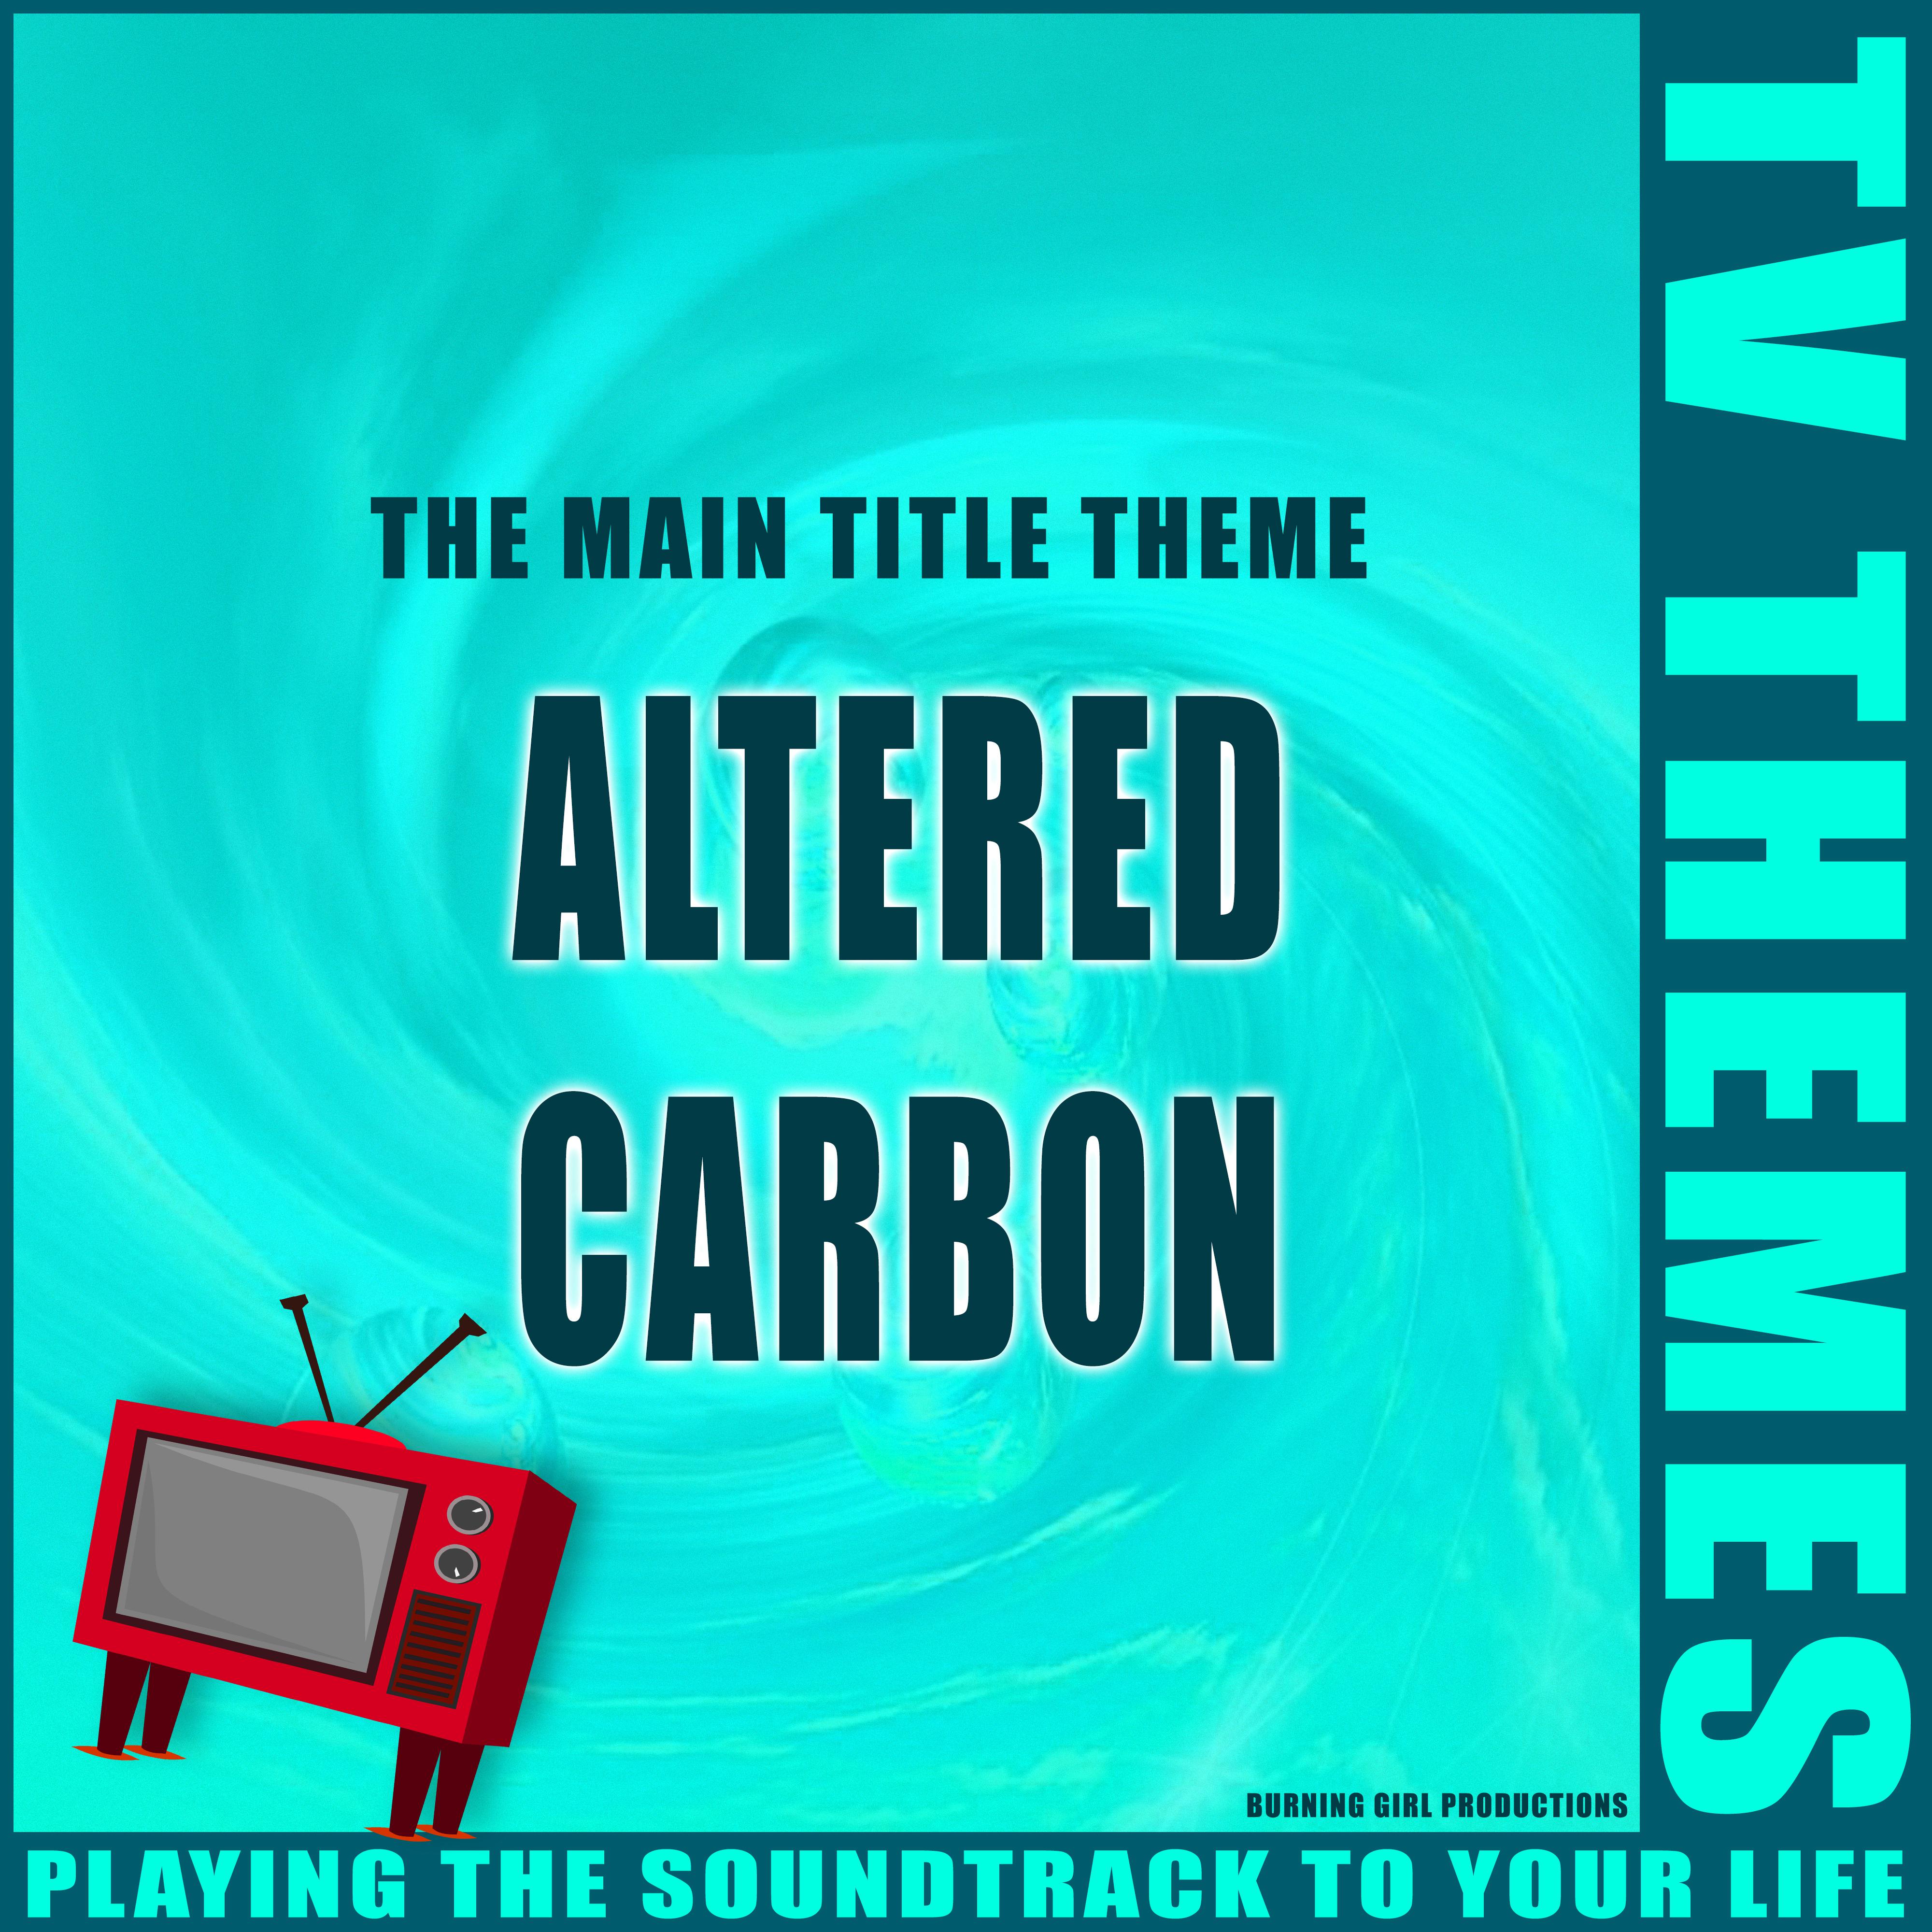 Altered Carbon - The Main Title Theme